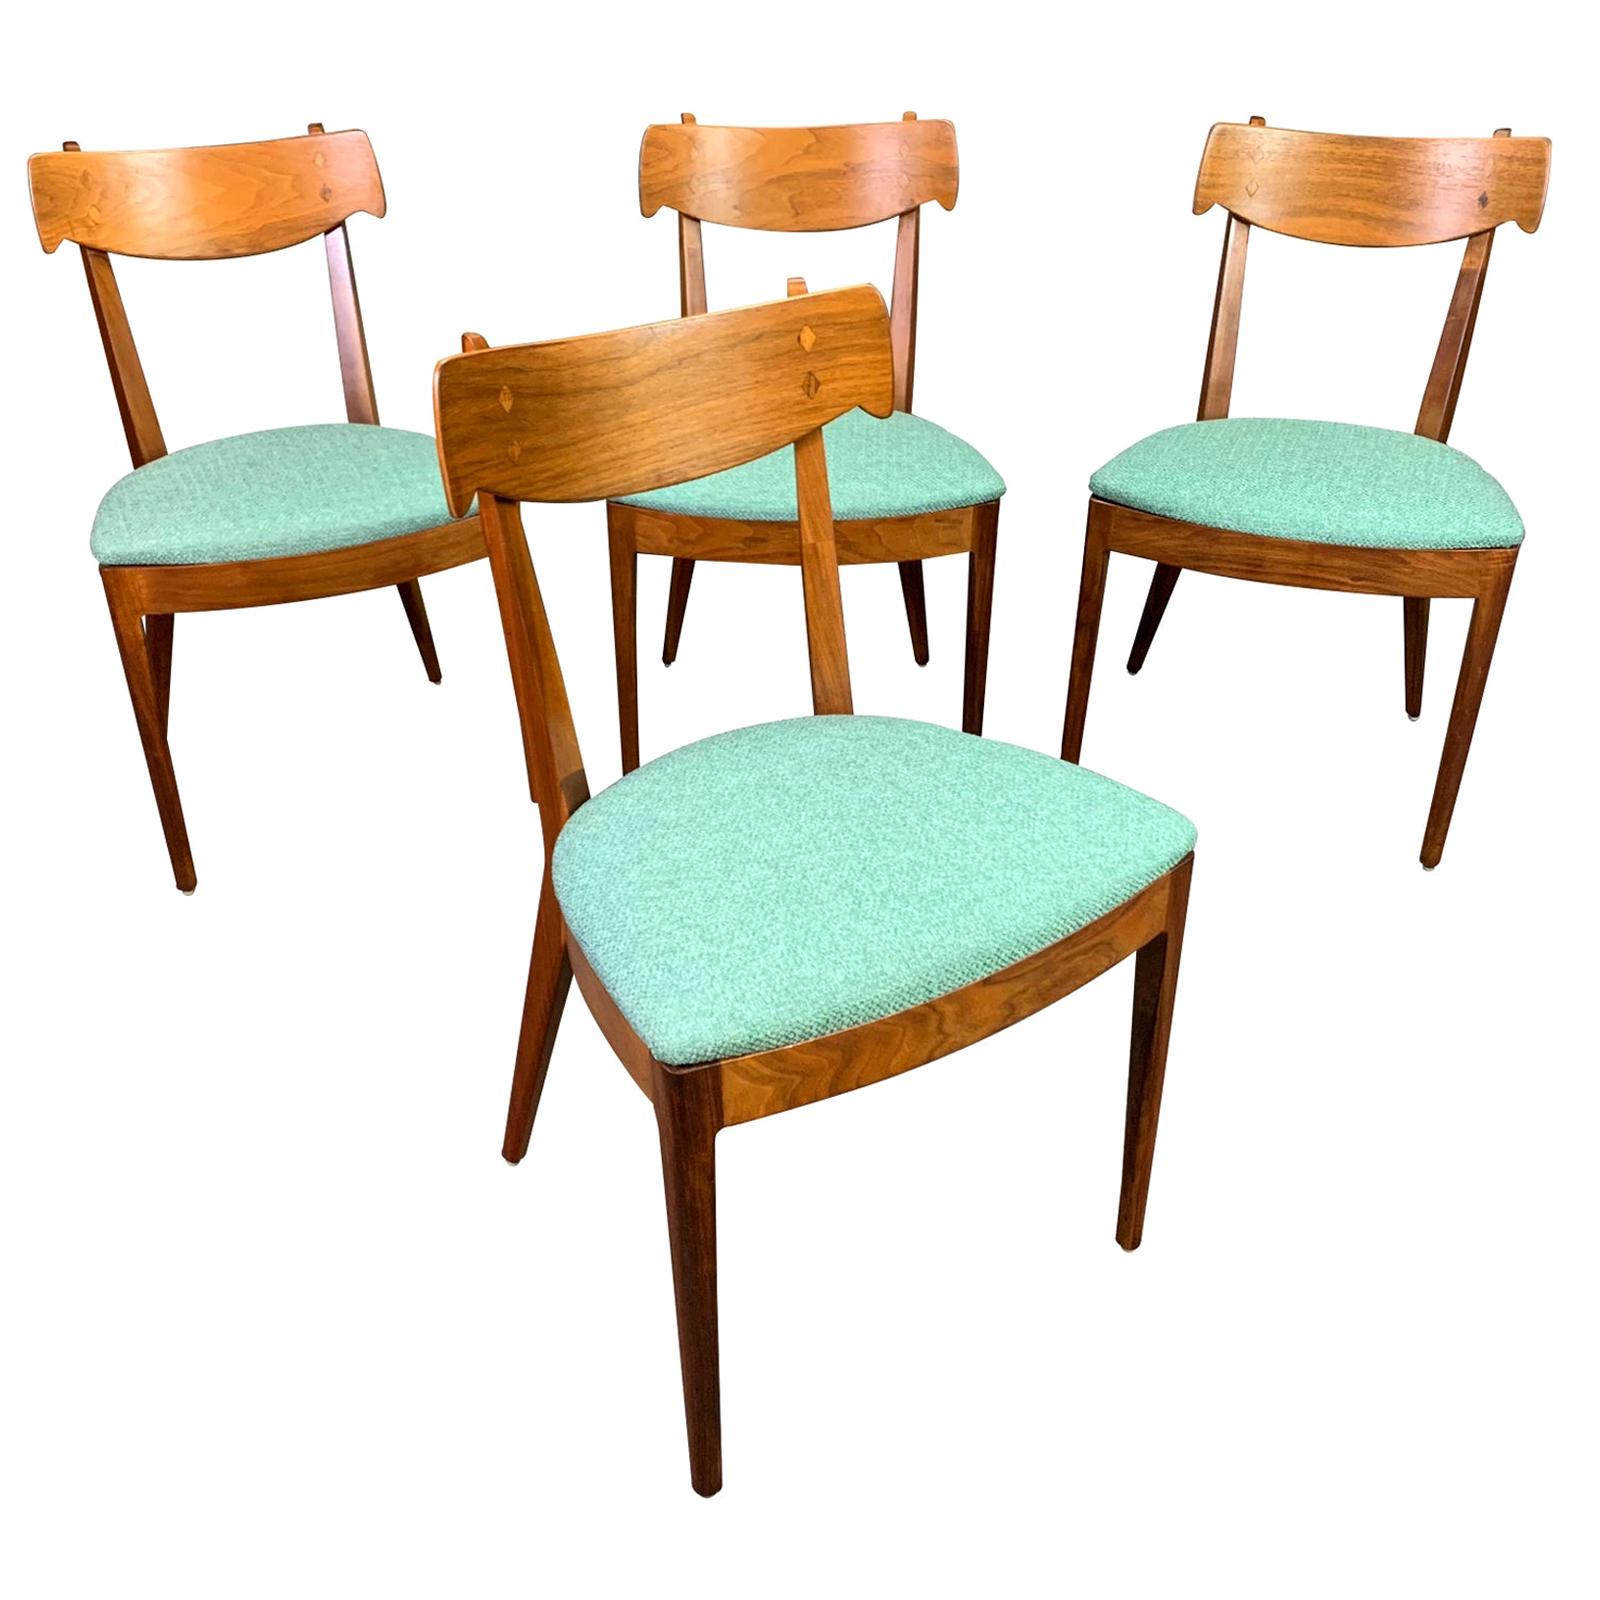 Vintage Midcentury Walnut "Declaration" Dining Chairs by Drexel, Set of Four